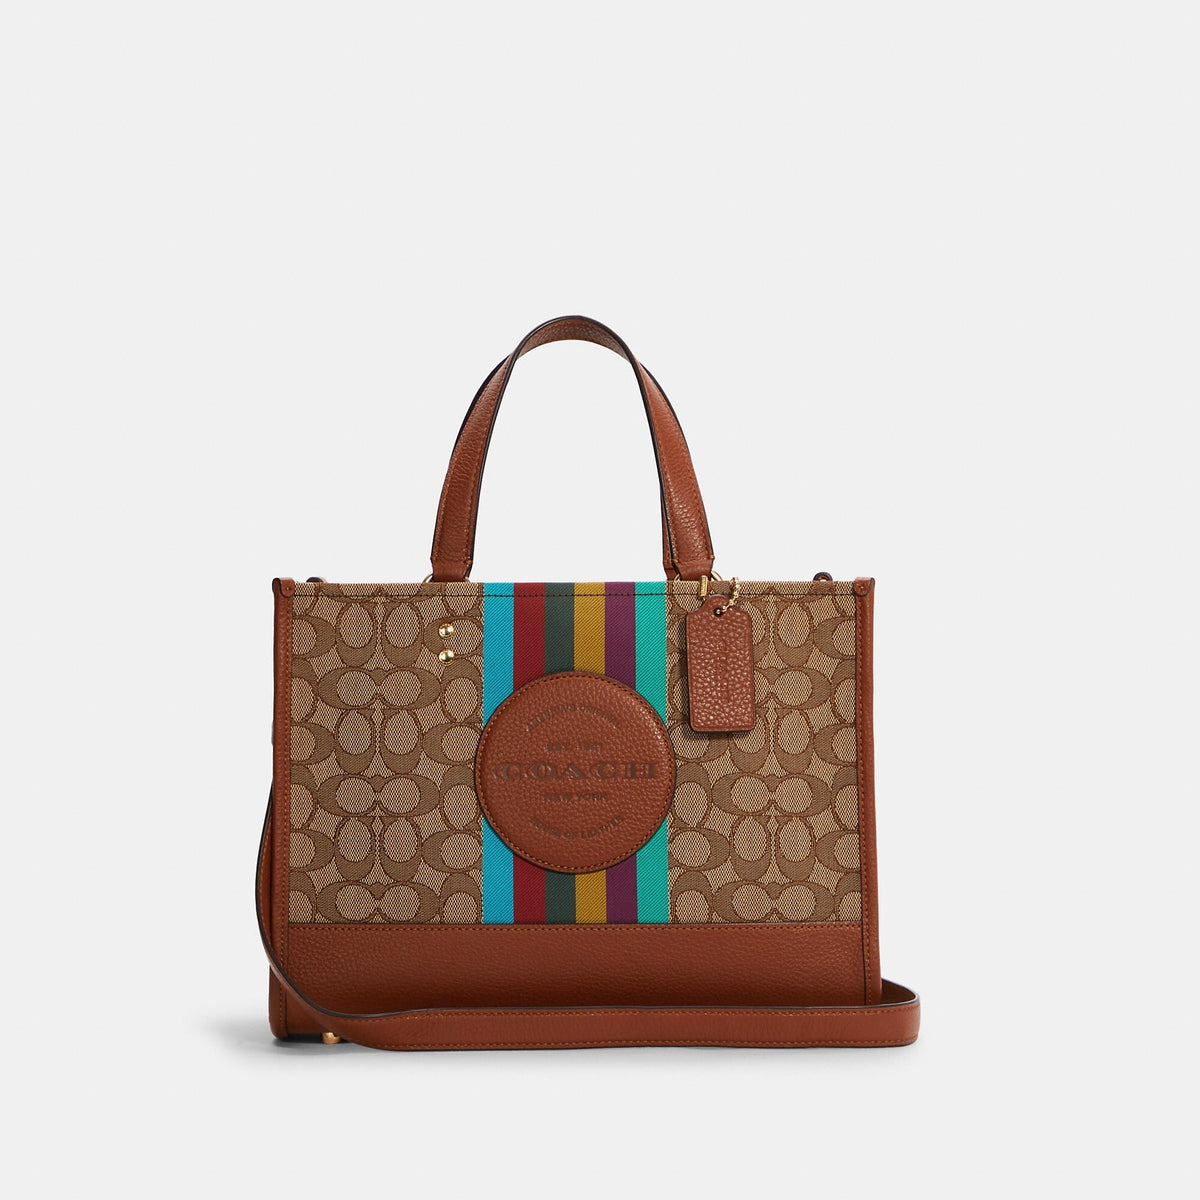 Coach Outlet Dempsey Carryall In Signature Jacquard With Stripe And Coach Patch - TJ Outlet